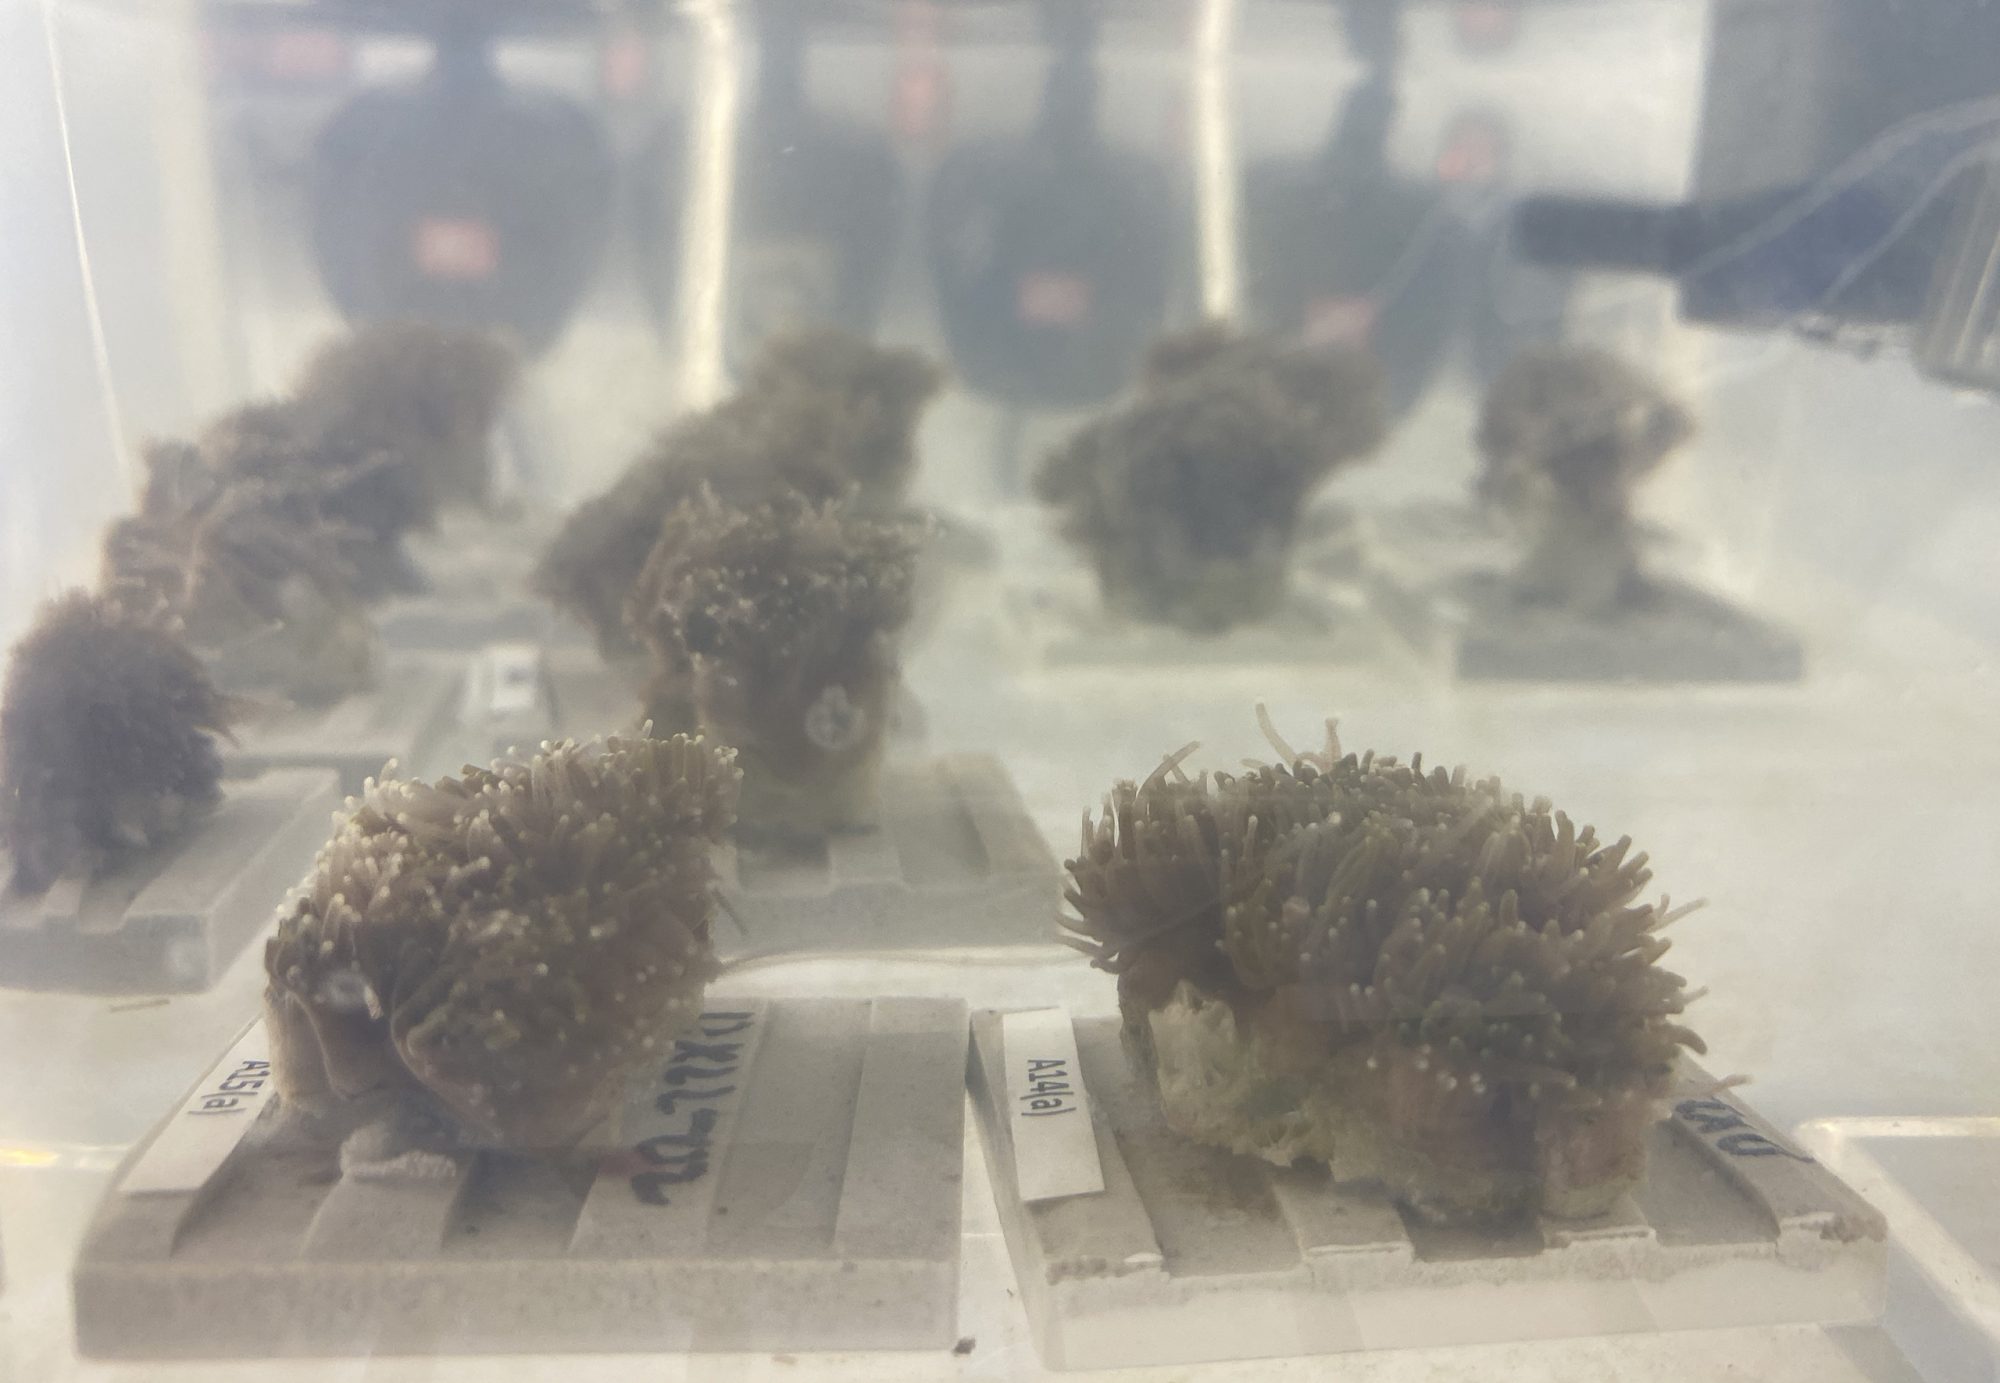 Galaxea fascicularis corals in Swims lab where their symbiont species are manipulated | Credit Jon Cybulski